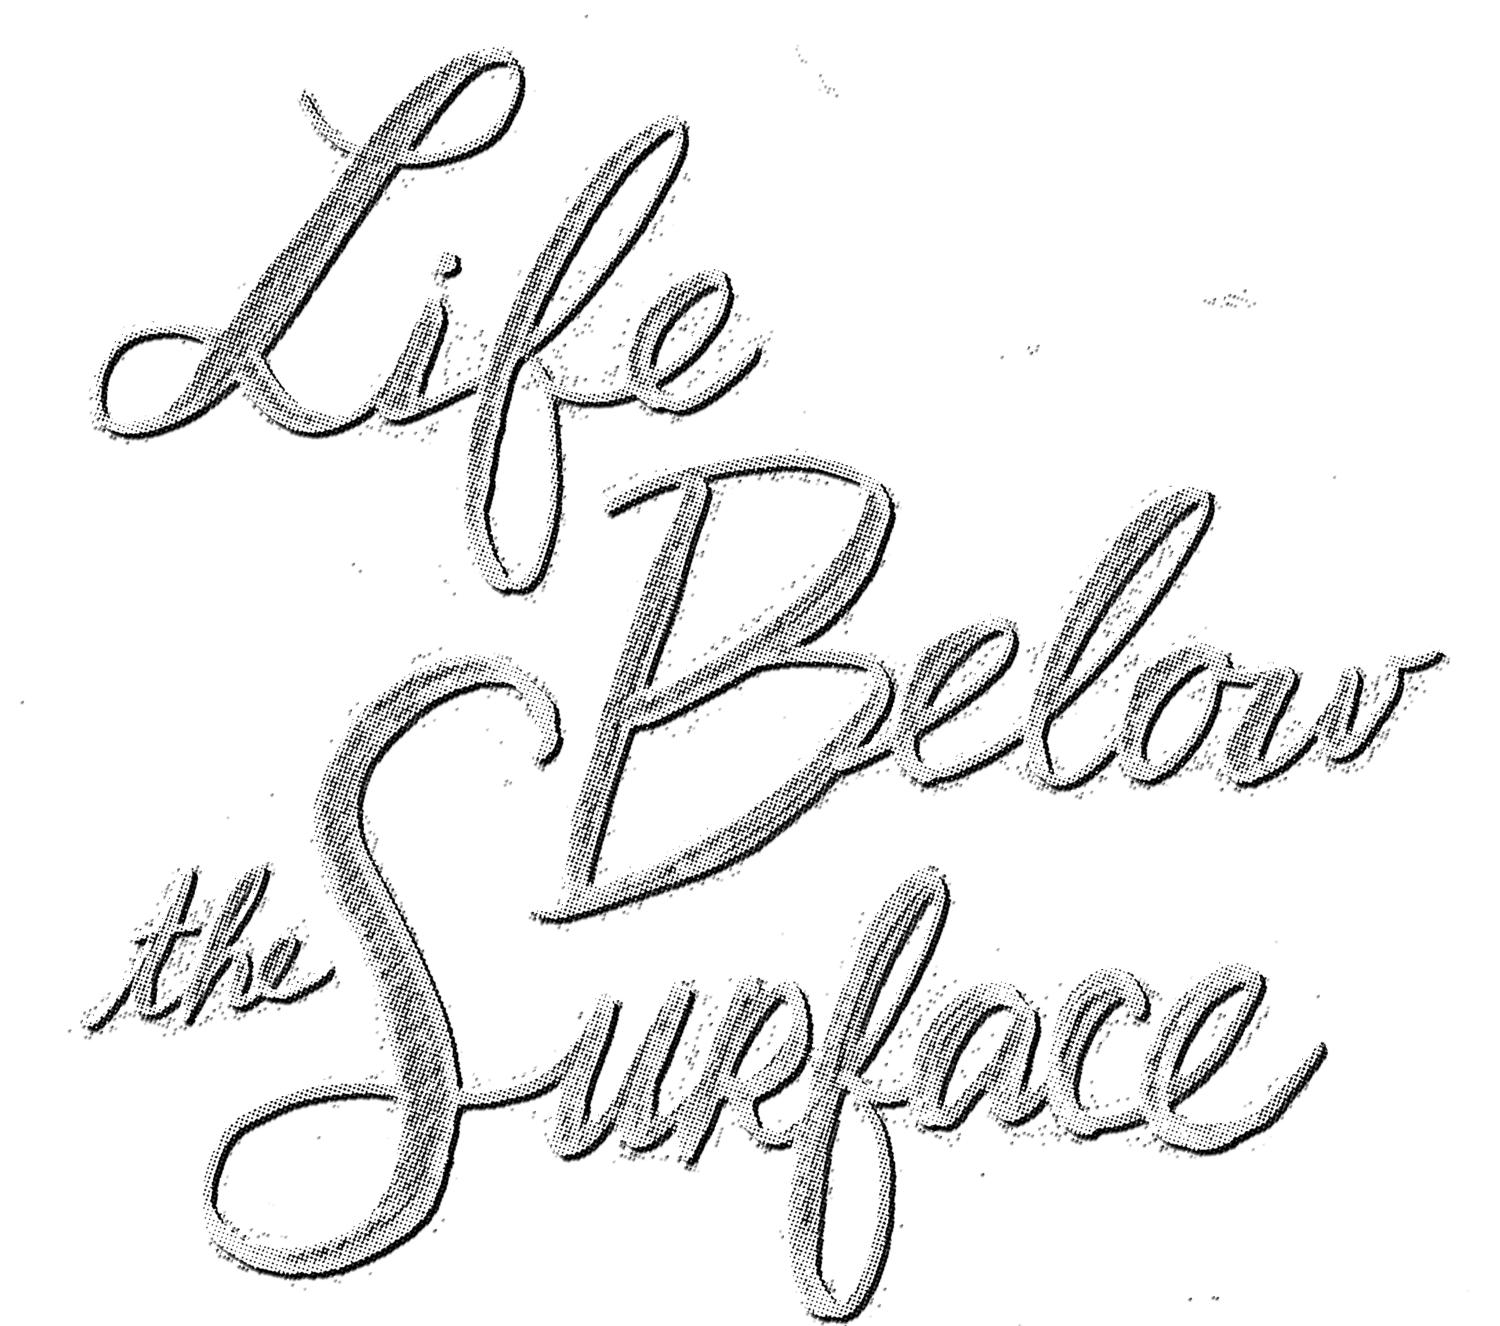 LIFE BELOW THE SURFACE